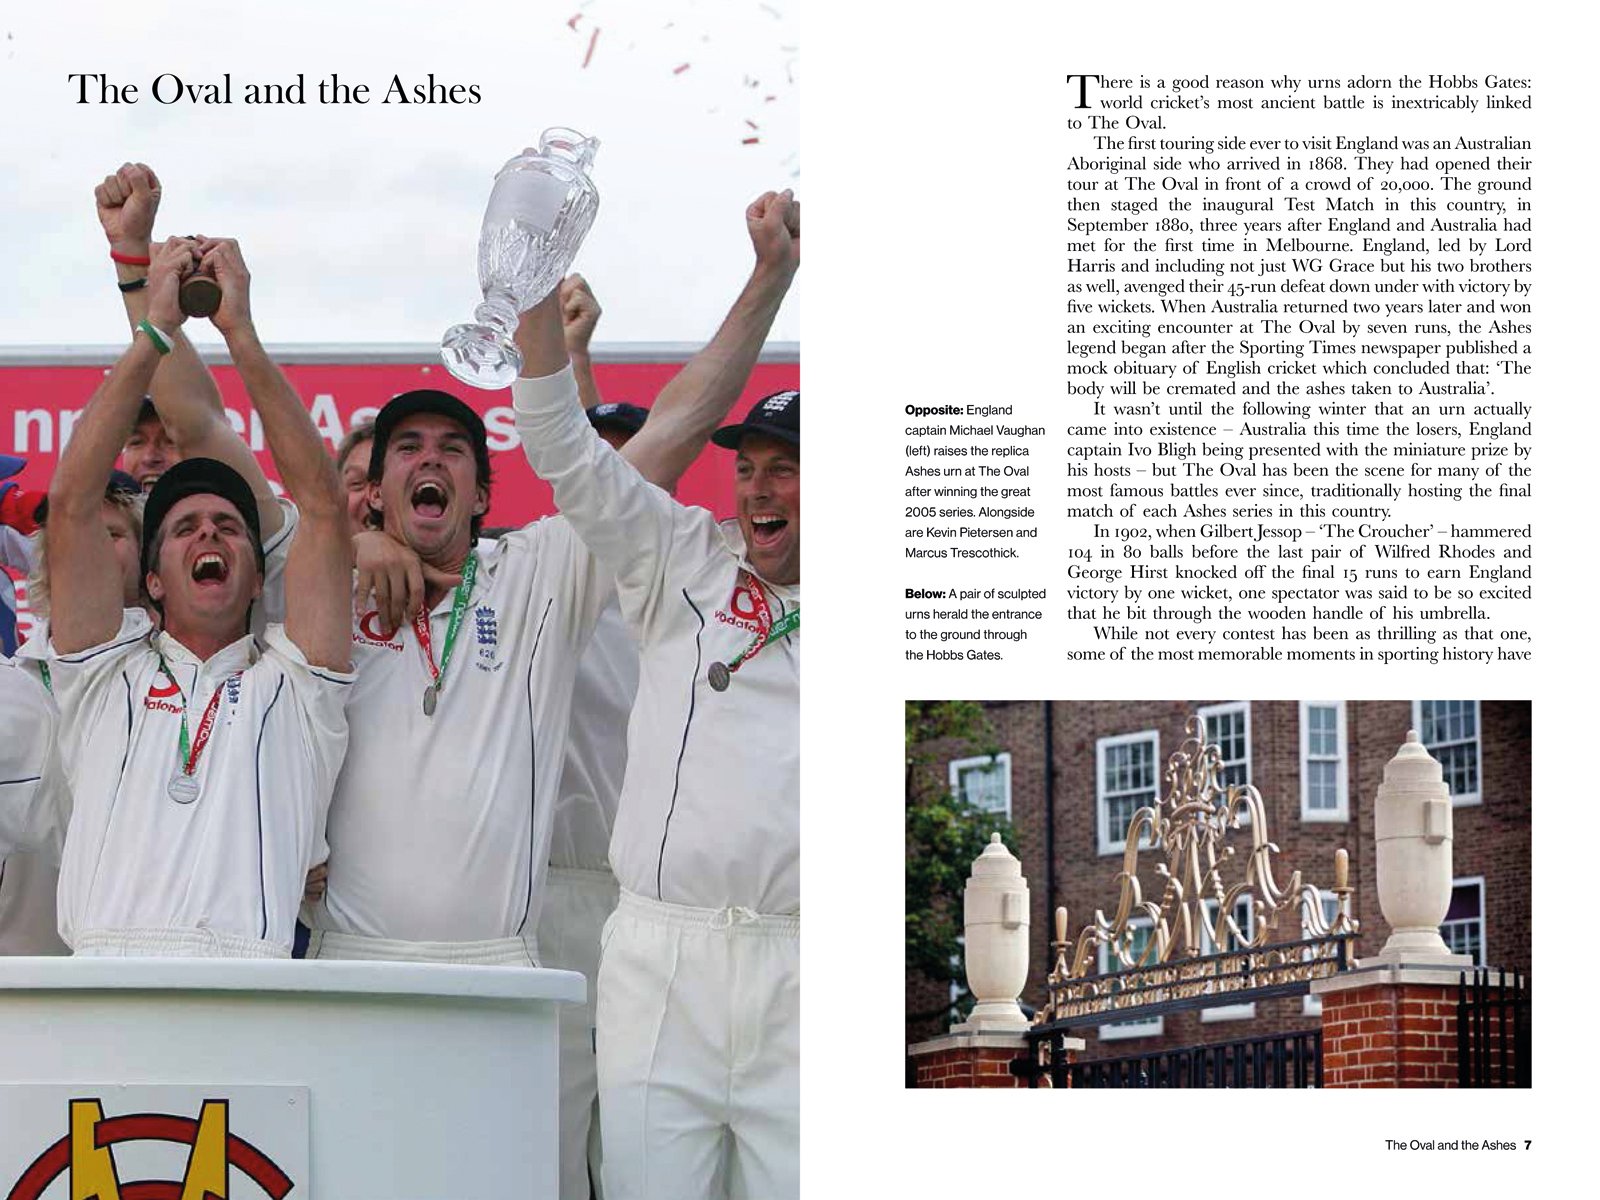 The Oval cricket ground during 100th test, England V South Africa, The Oval in white font above, Souvenir Guidebook